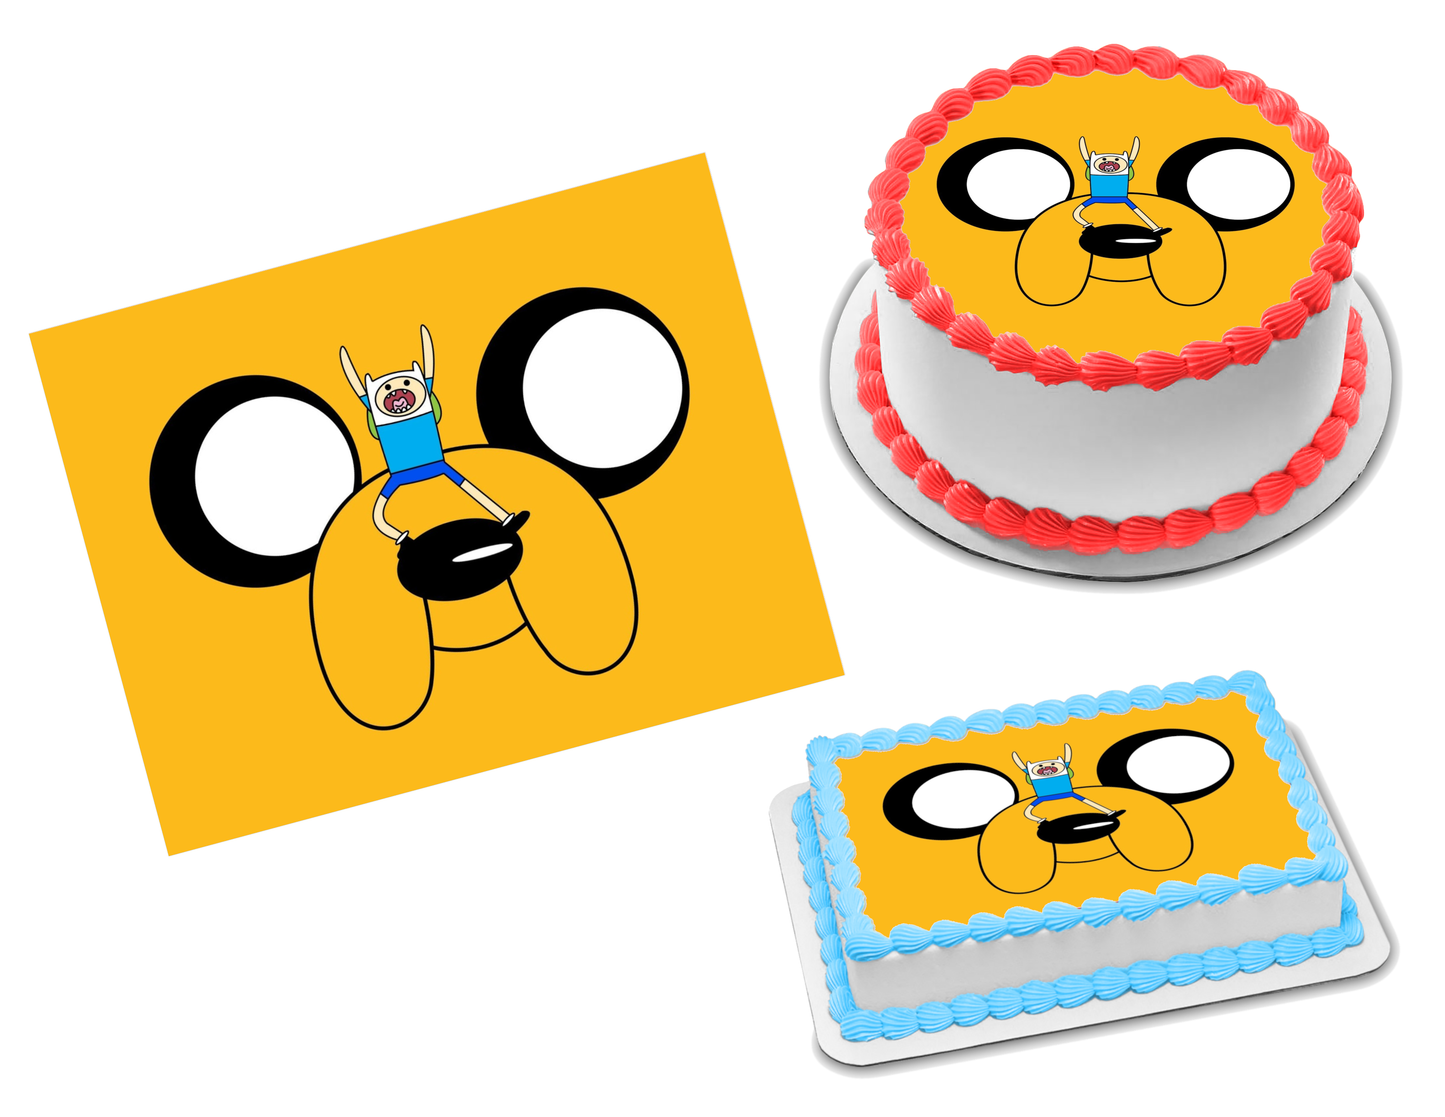 Adventure Time Edible Image Frosting Sheet #9 Topper (70+ sizes)